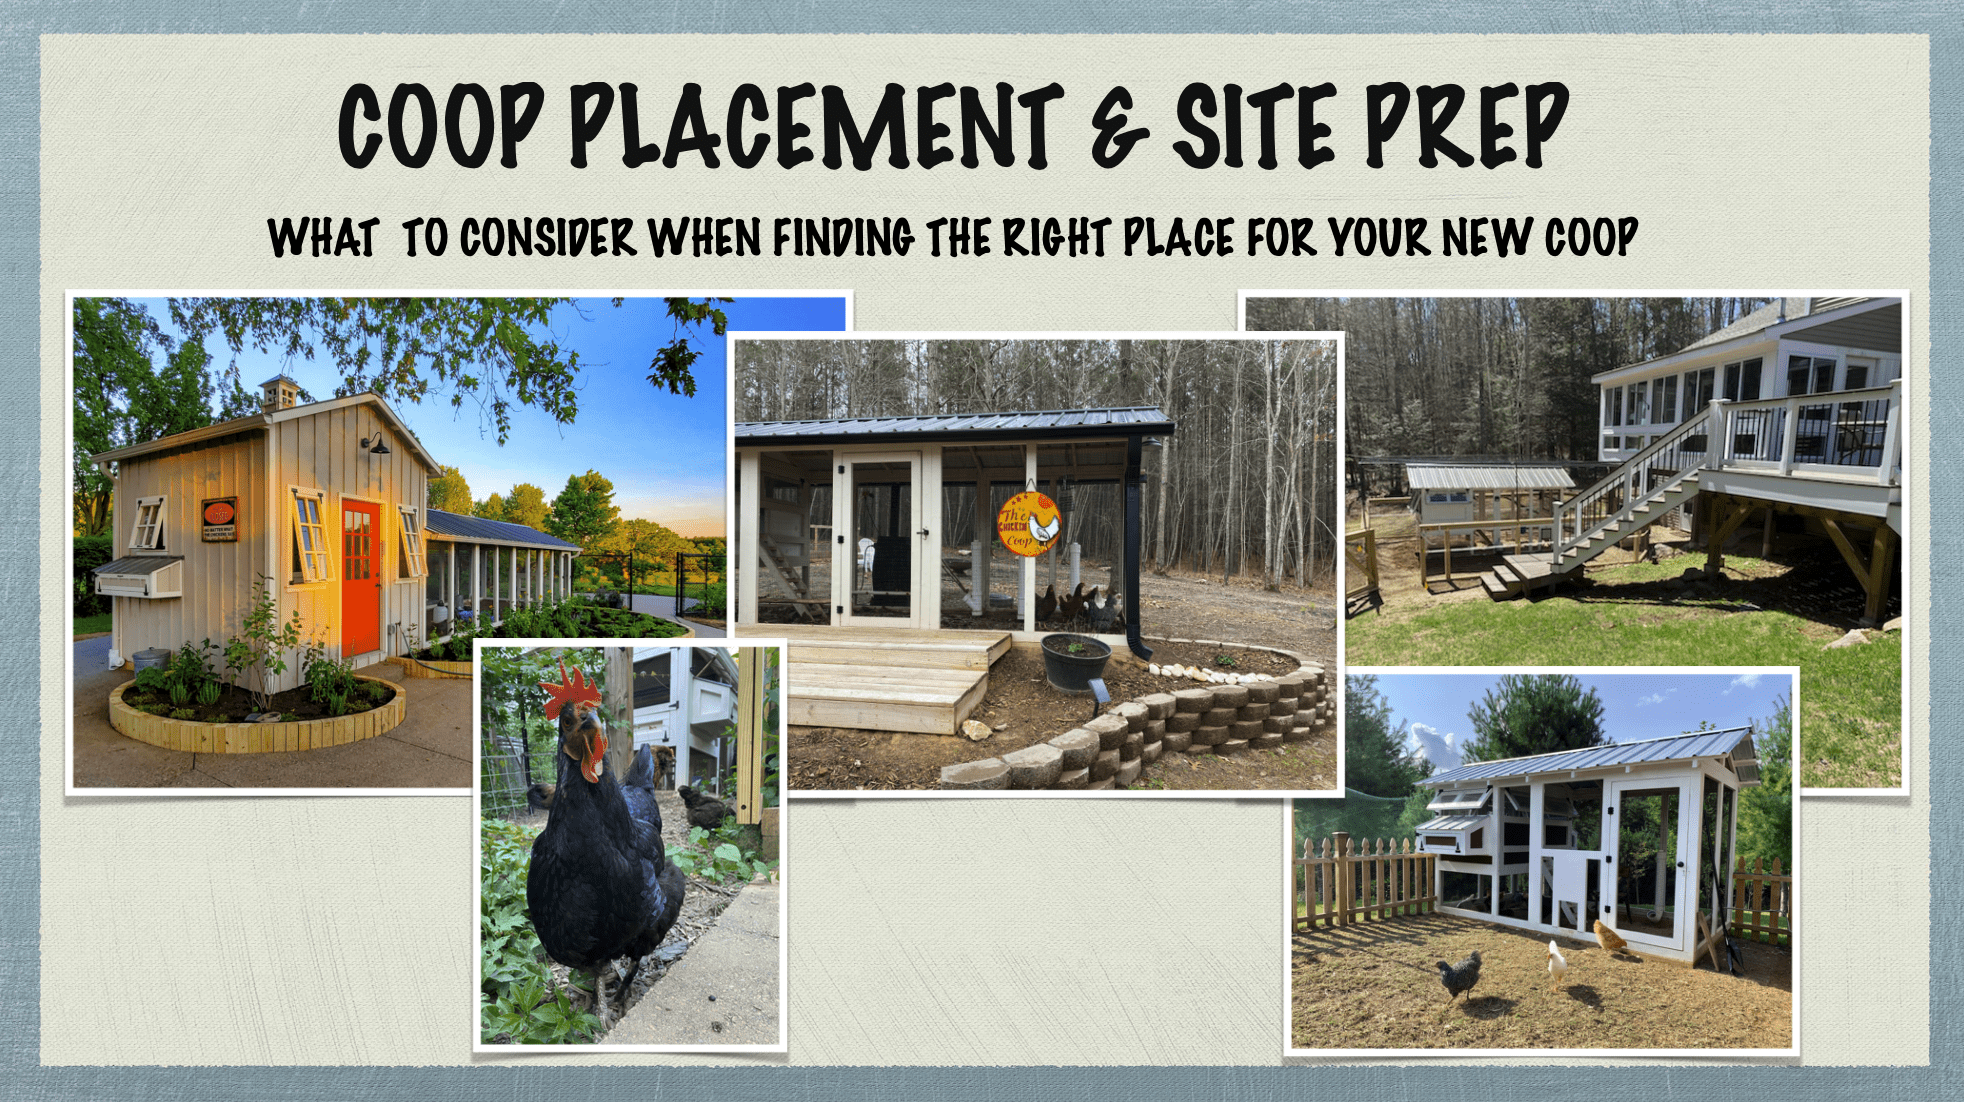 Carolina Coops - what to consider when finding the right place for your coop